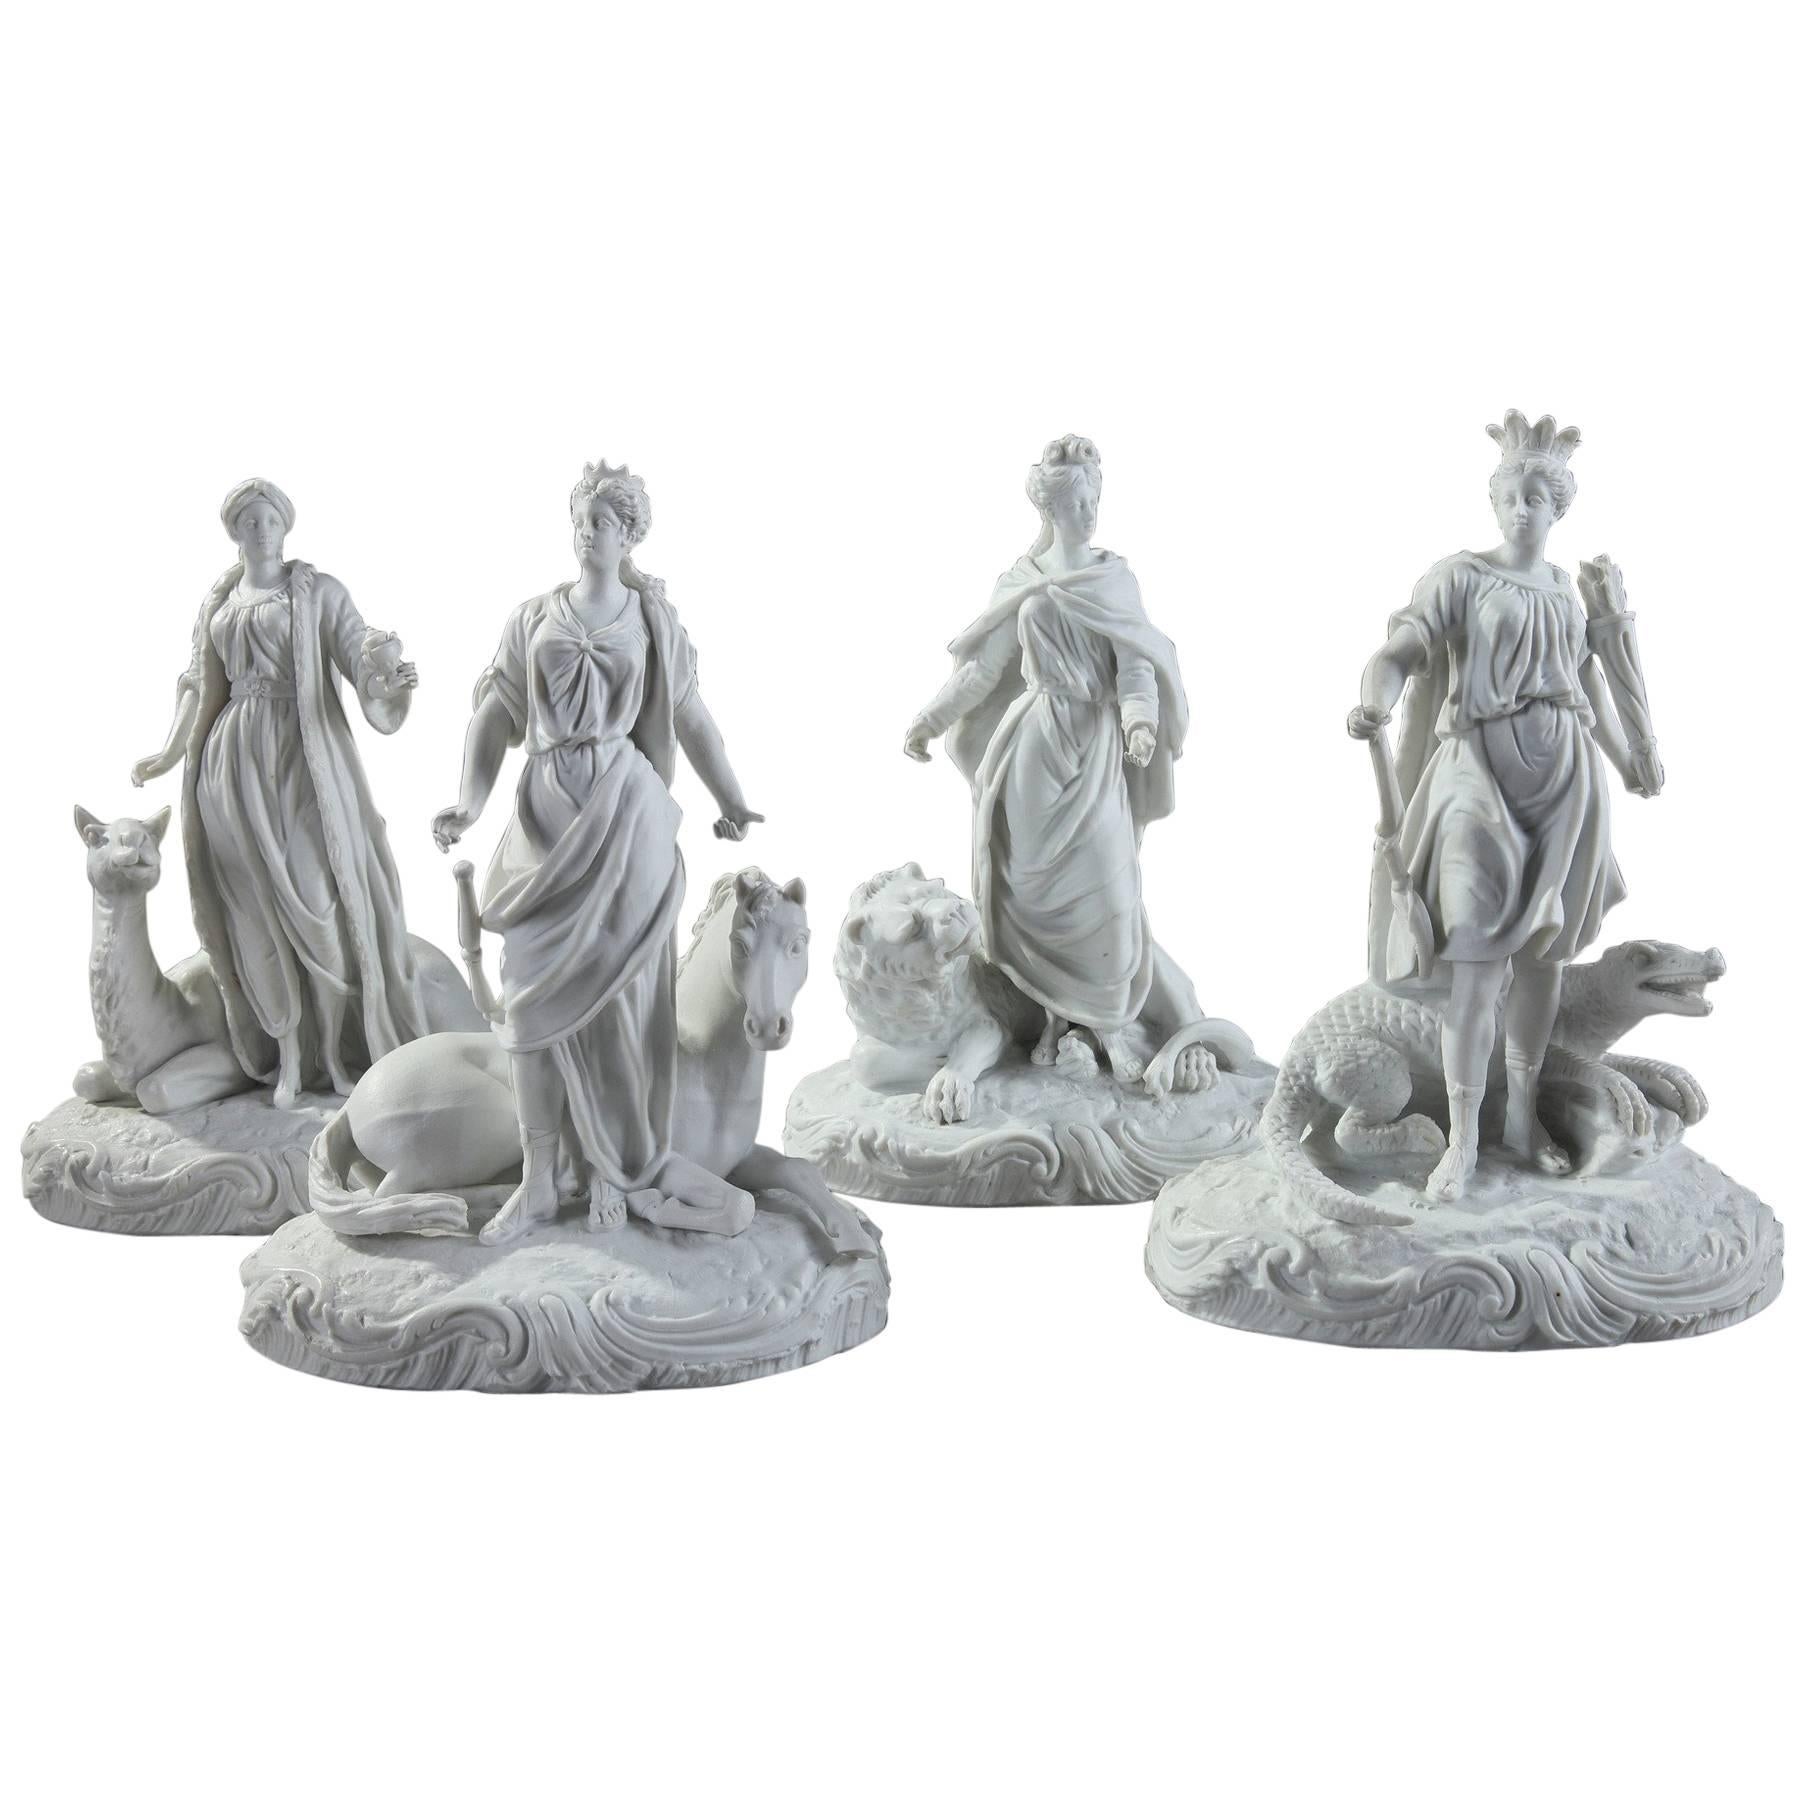 19th Century Bisque Sculptures of the Four Continents